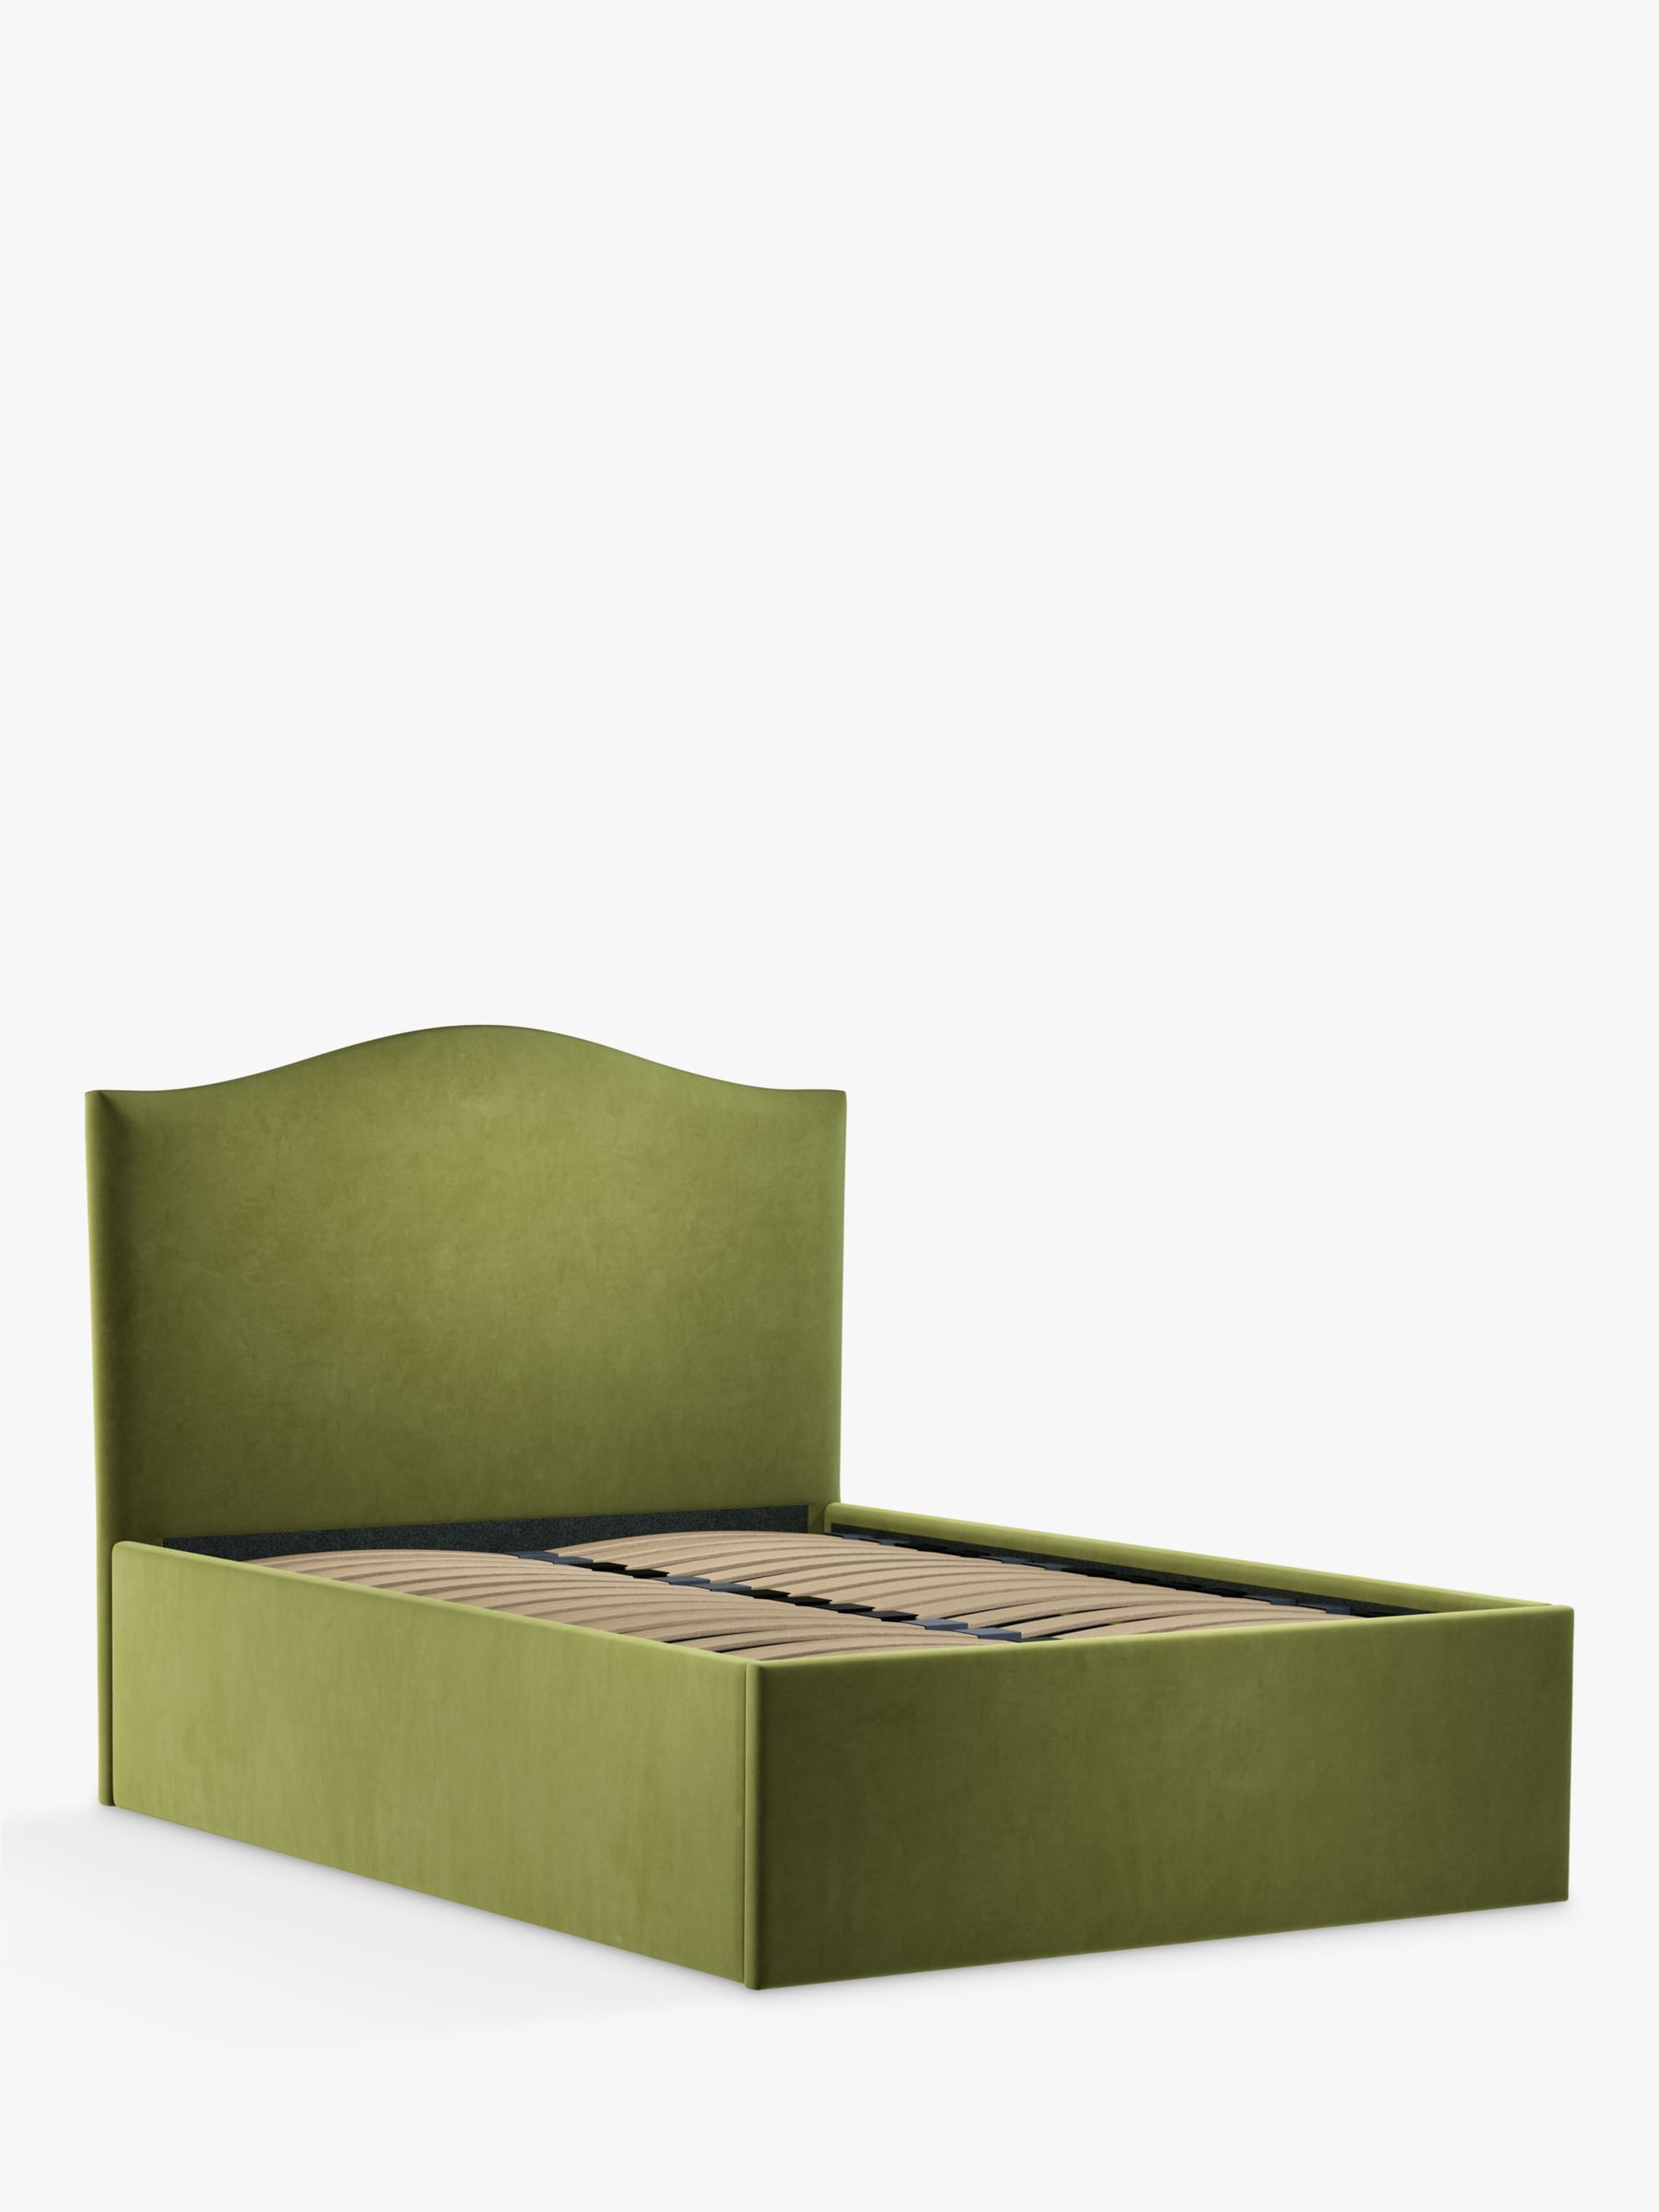 Photo of John lewis charlotte ottoman storage upholstered bed frame double